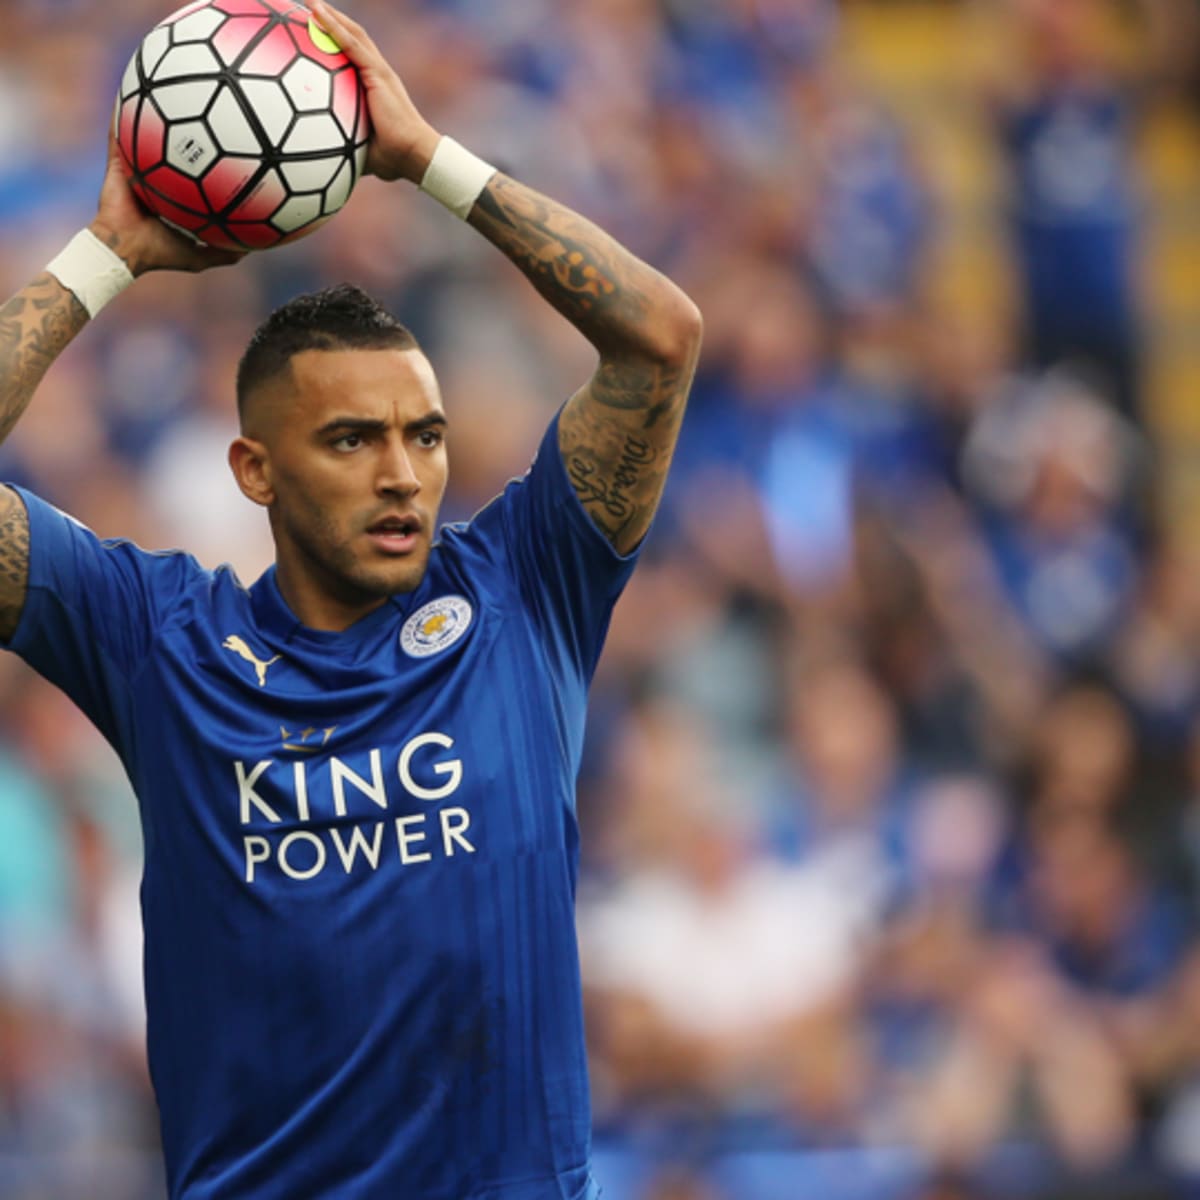 Leicester City S Danny Simpson No Longer Has Community Service Sports Illustrated